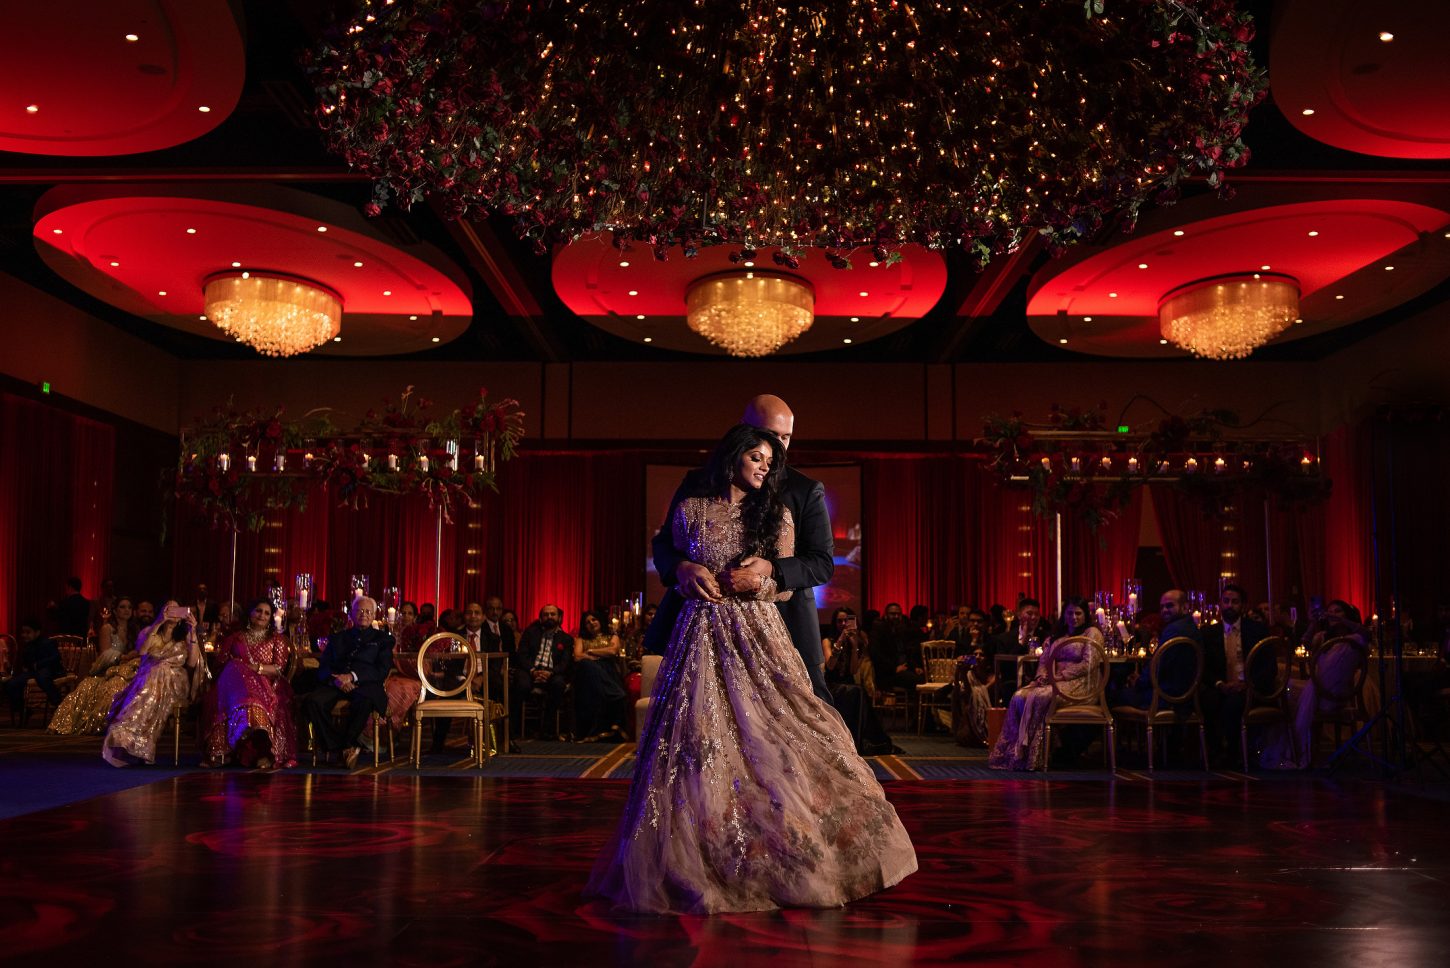 First dance of an indian weddiing in texas, the decoration and lighning is red and the couple dances in the middle